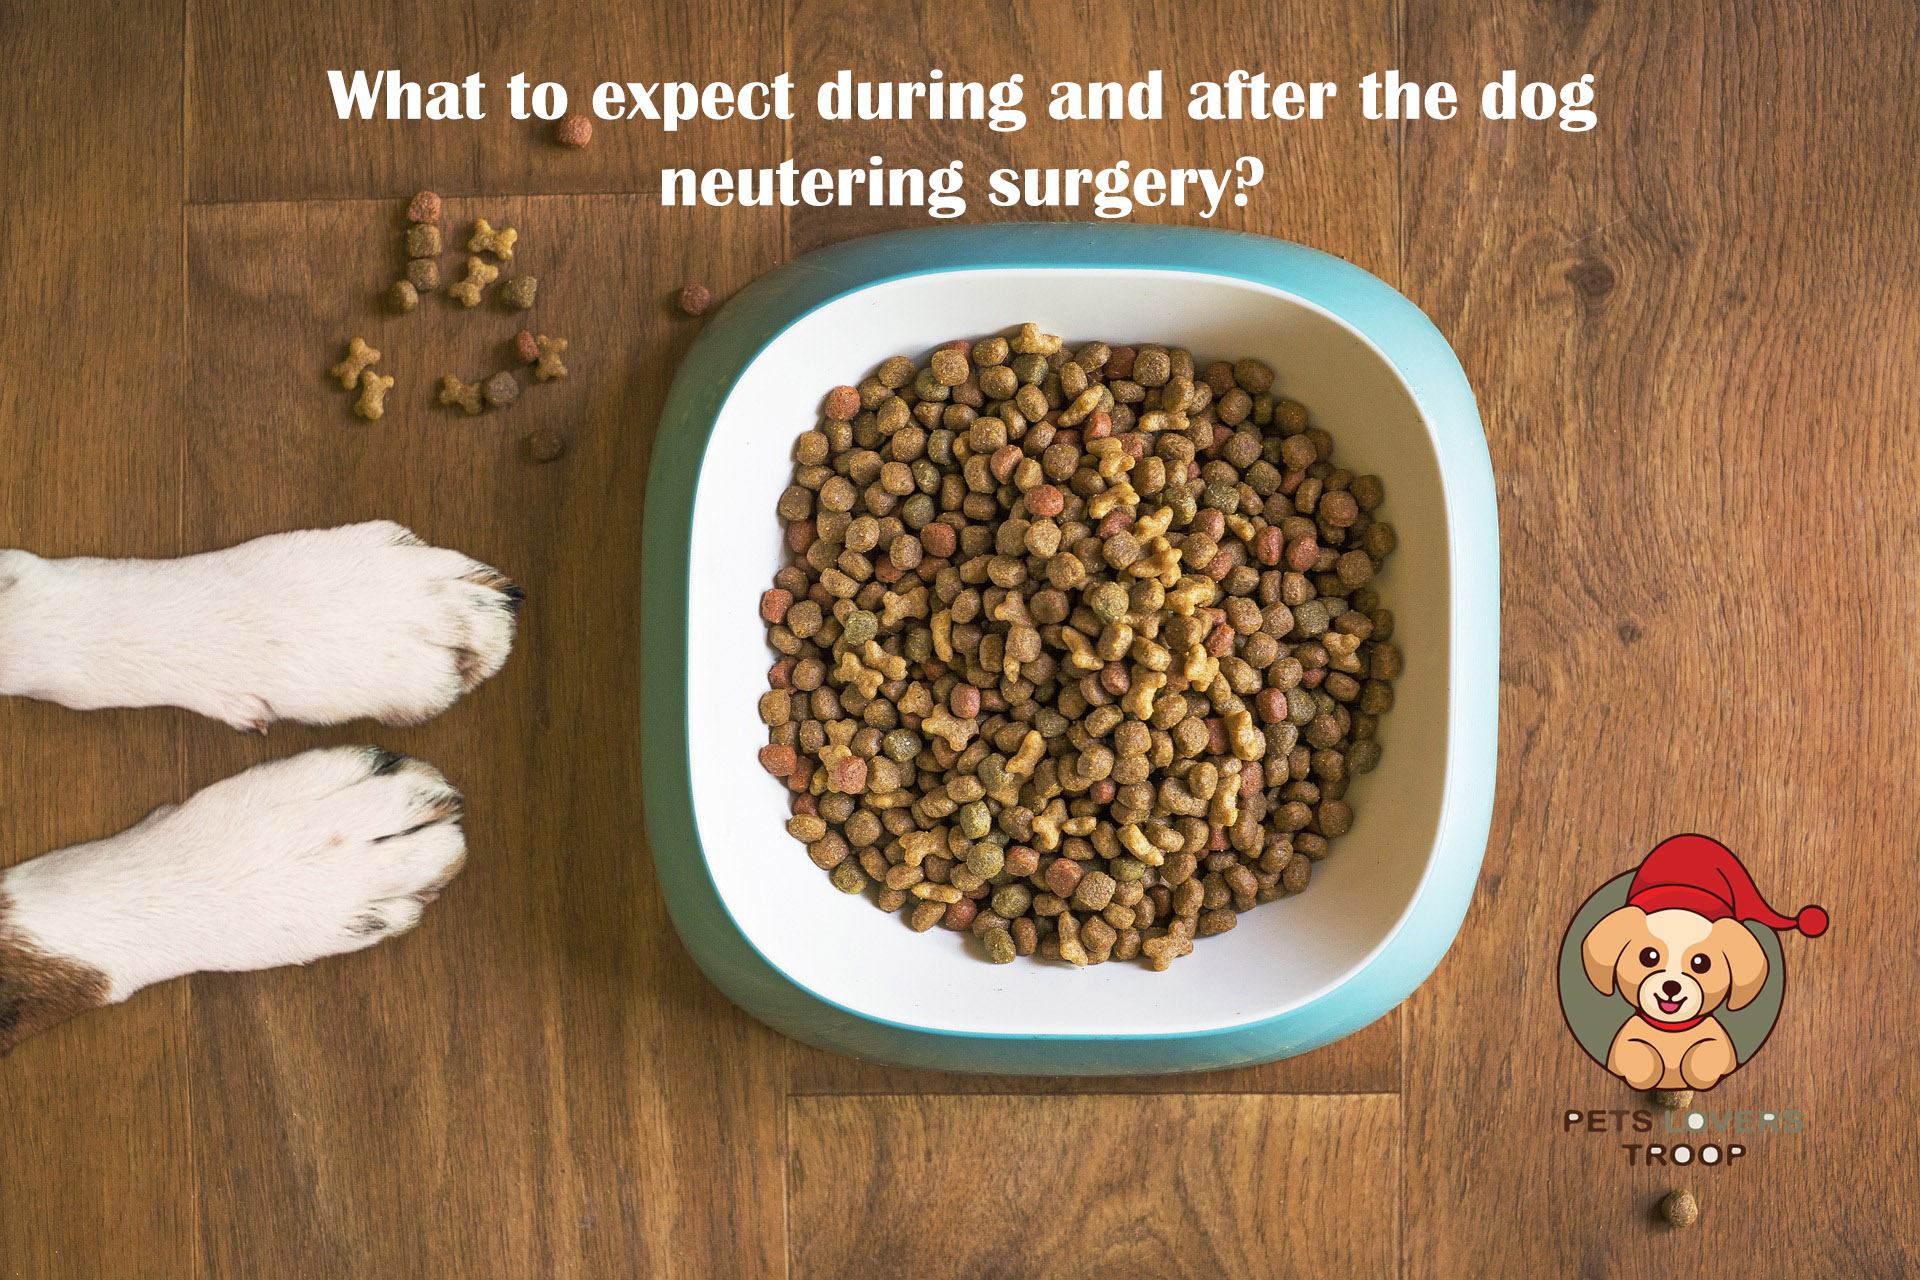 What to expect during and after the dog neutering surgery?